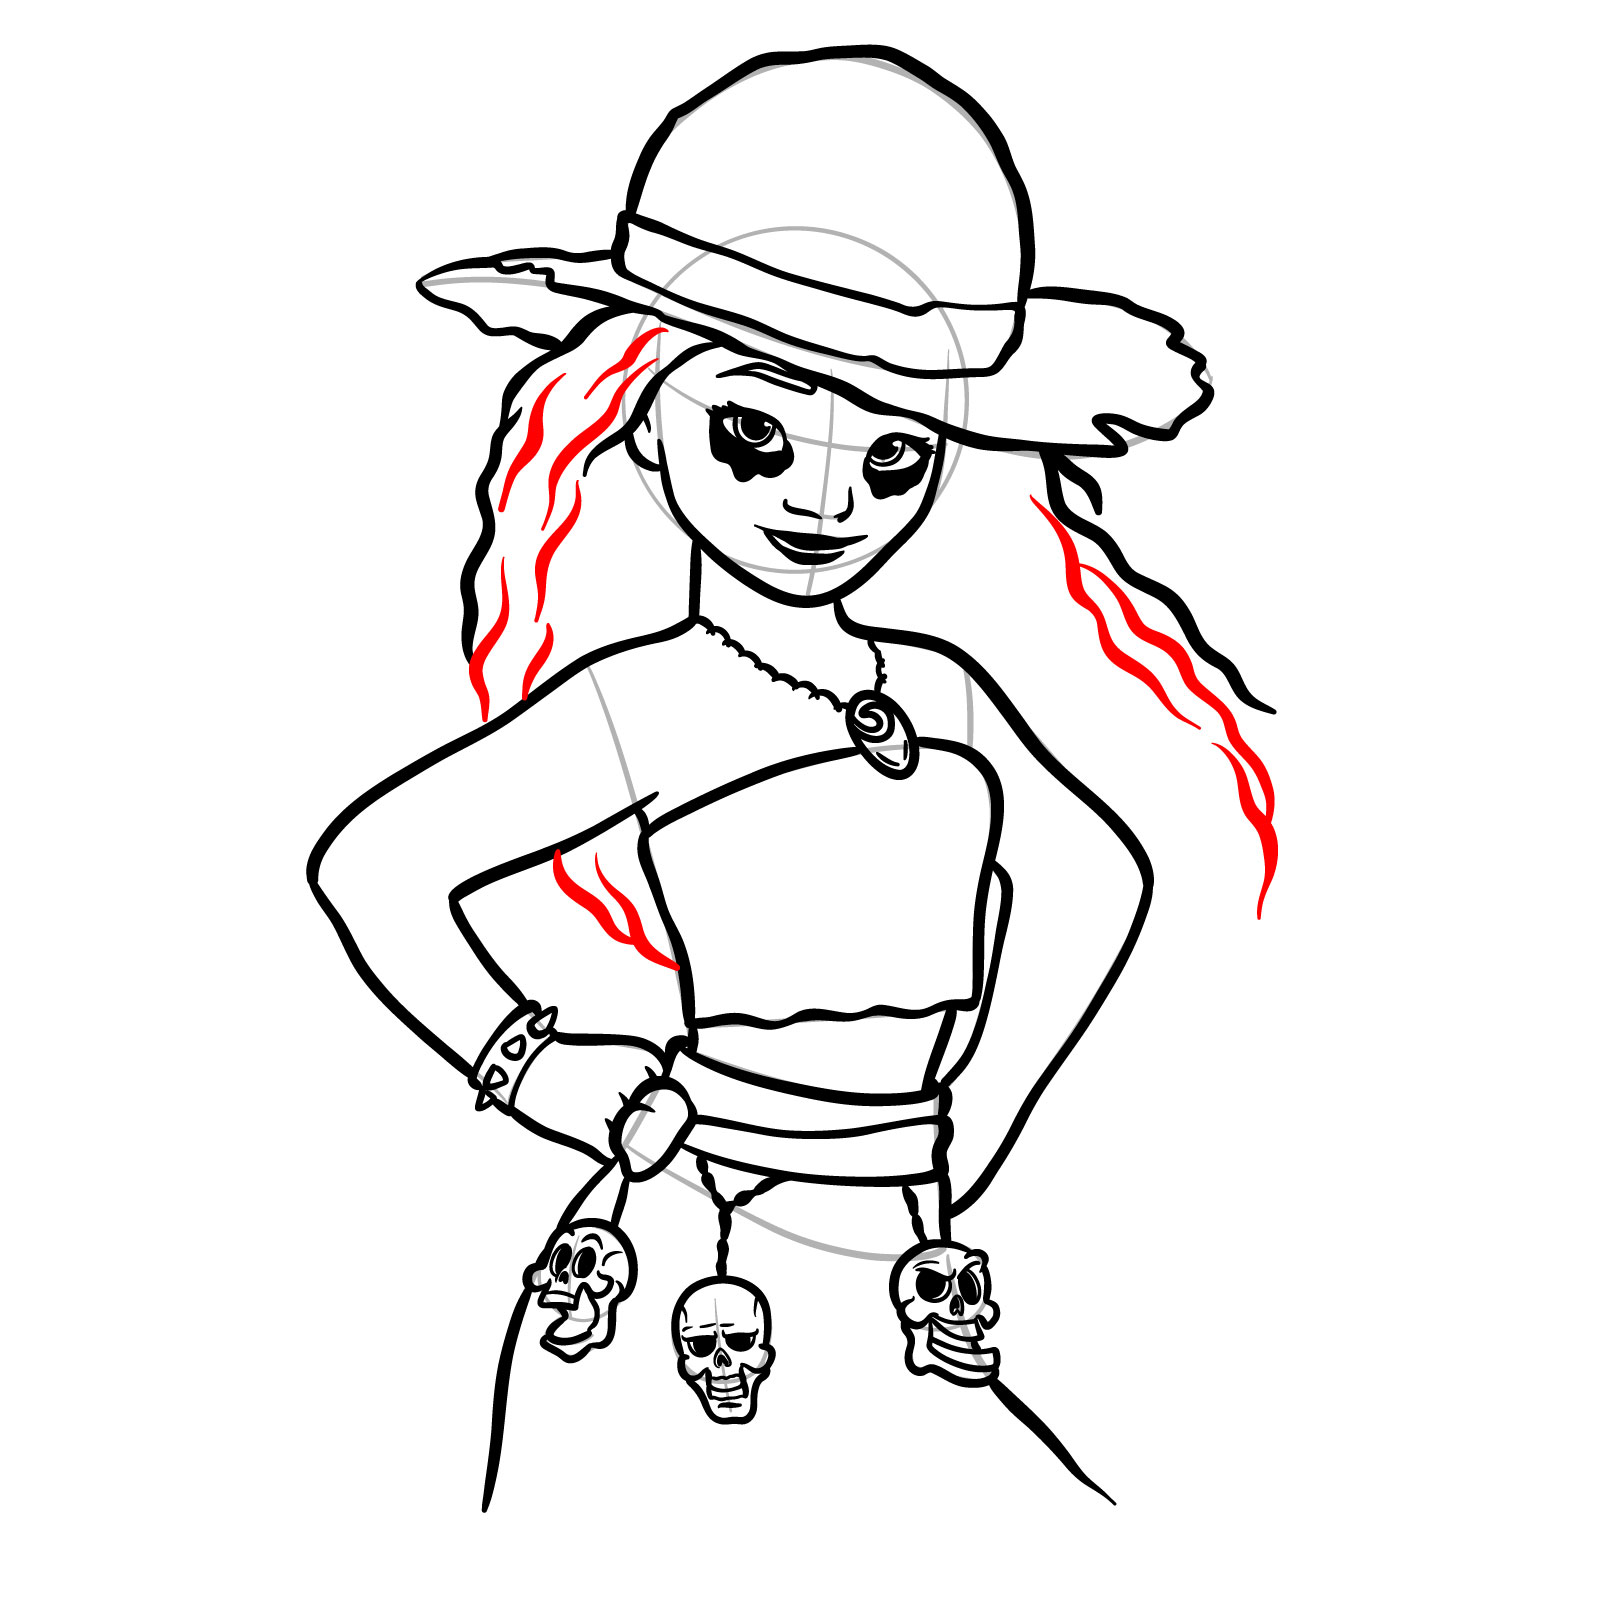 How to Draw Halloween Moana as a Staw Hat Pirate - step 35